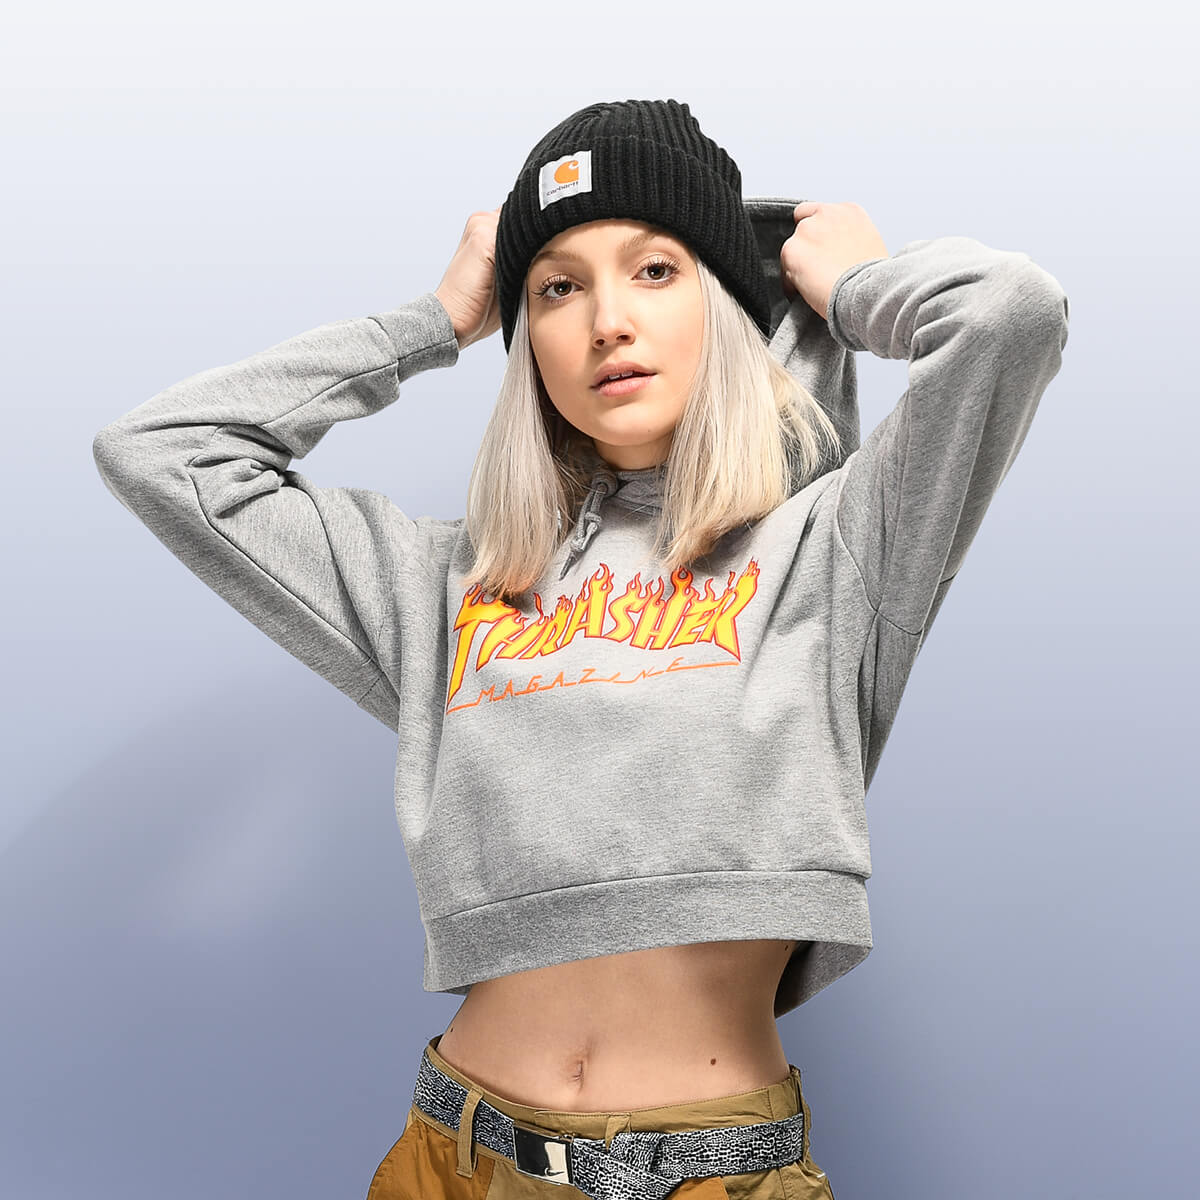 WOMEN'S NEW ARRIVAL HOODIES FEAT. THRASHER & MORE - SHOP NOW